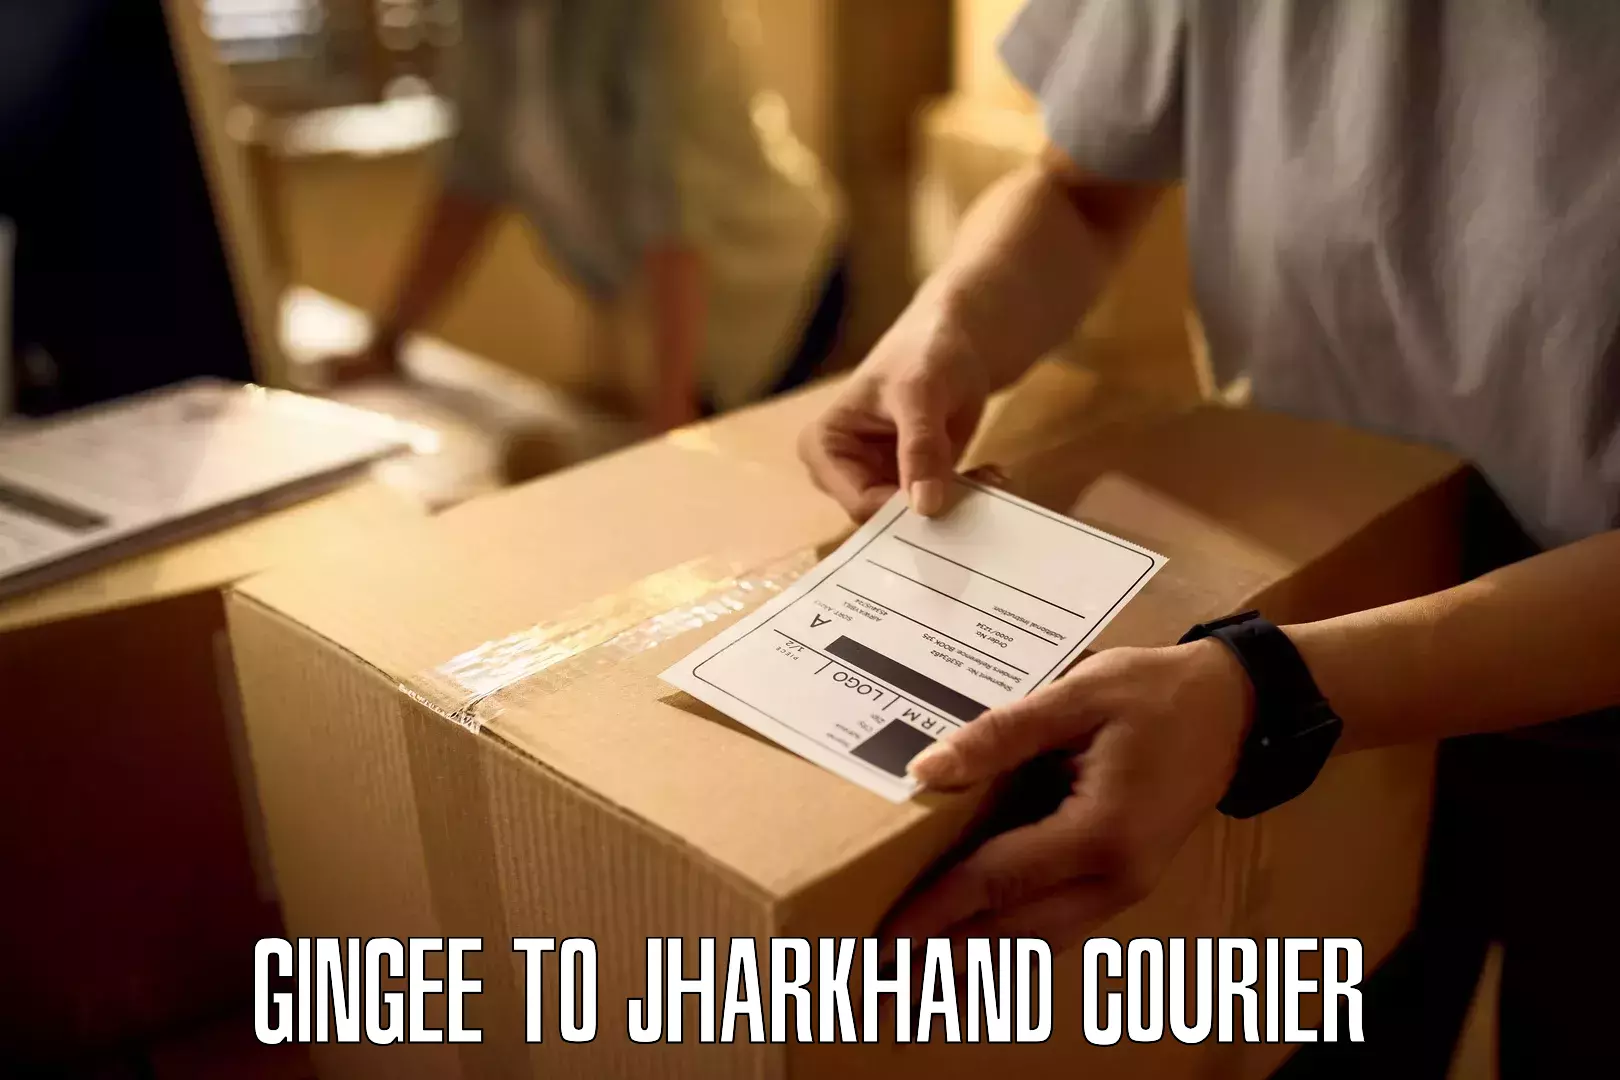 Bulk courier orders Gingee to Jamshedpur